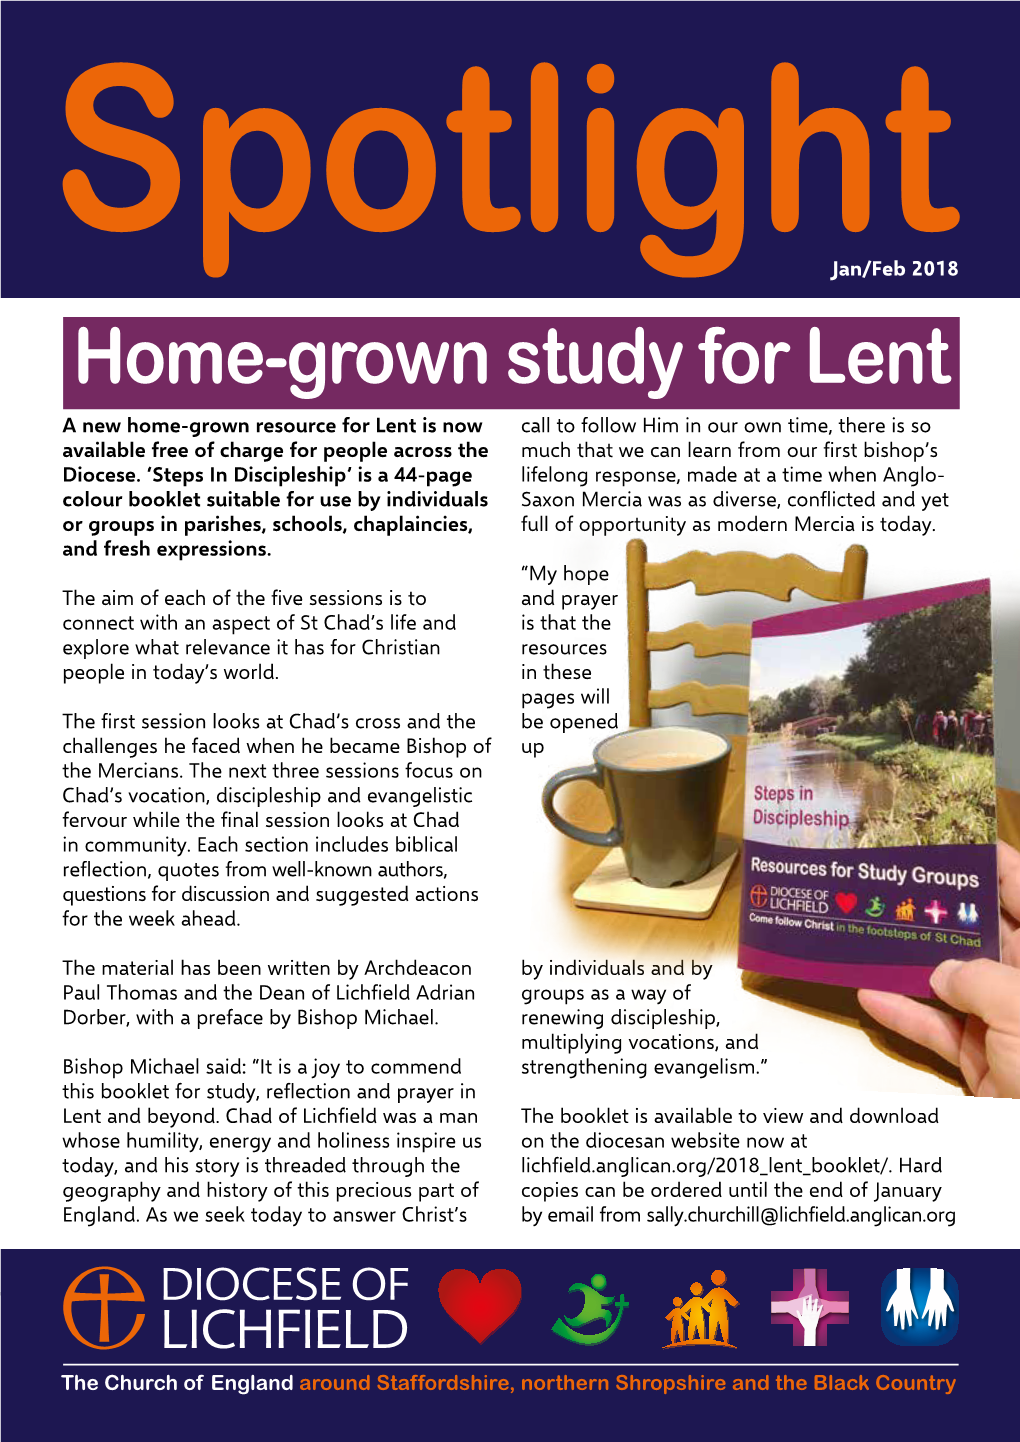 Home-Grown Study for Lent